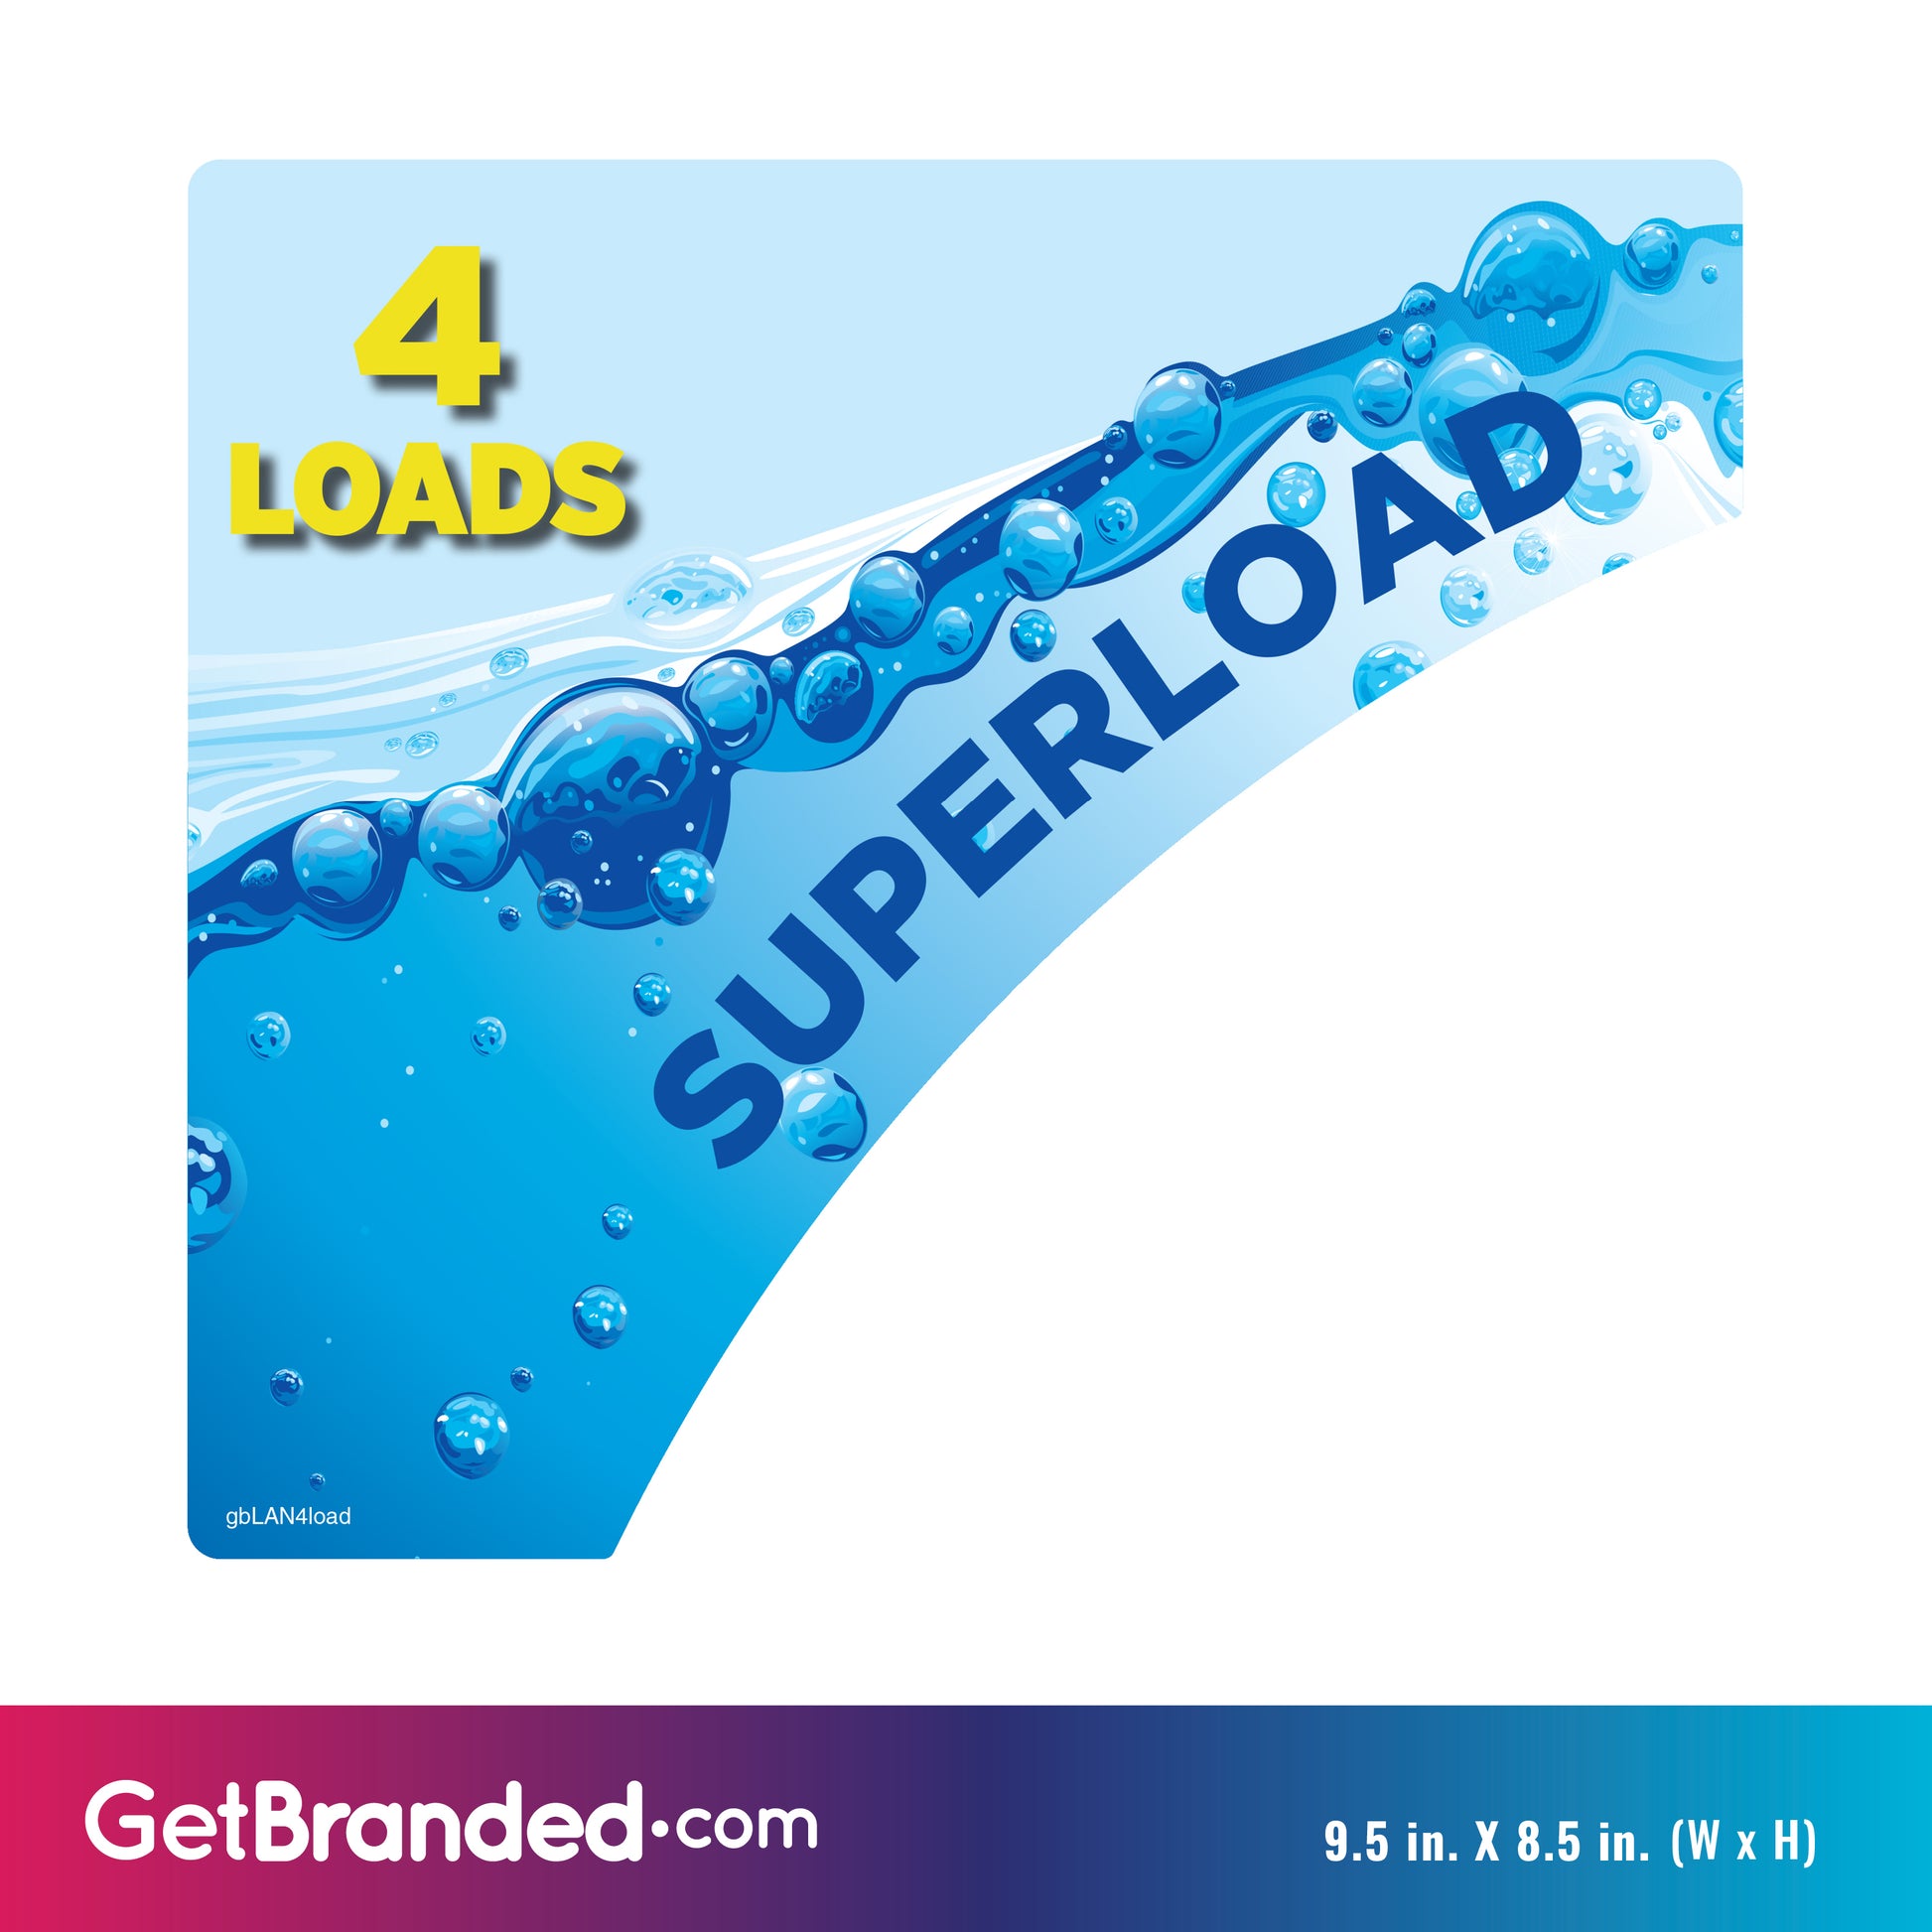 Decal for placement on washing machines at Laundromat displaying Superload - 4 Loads in size. Measurement details.